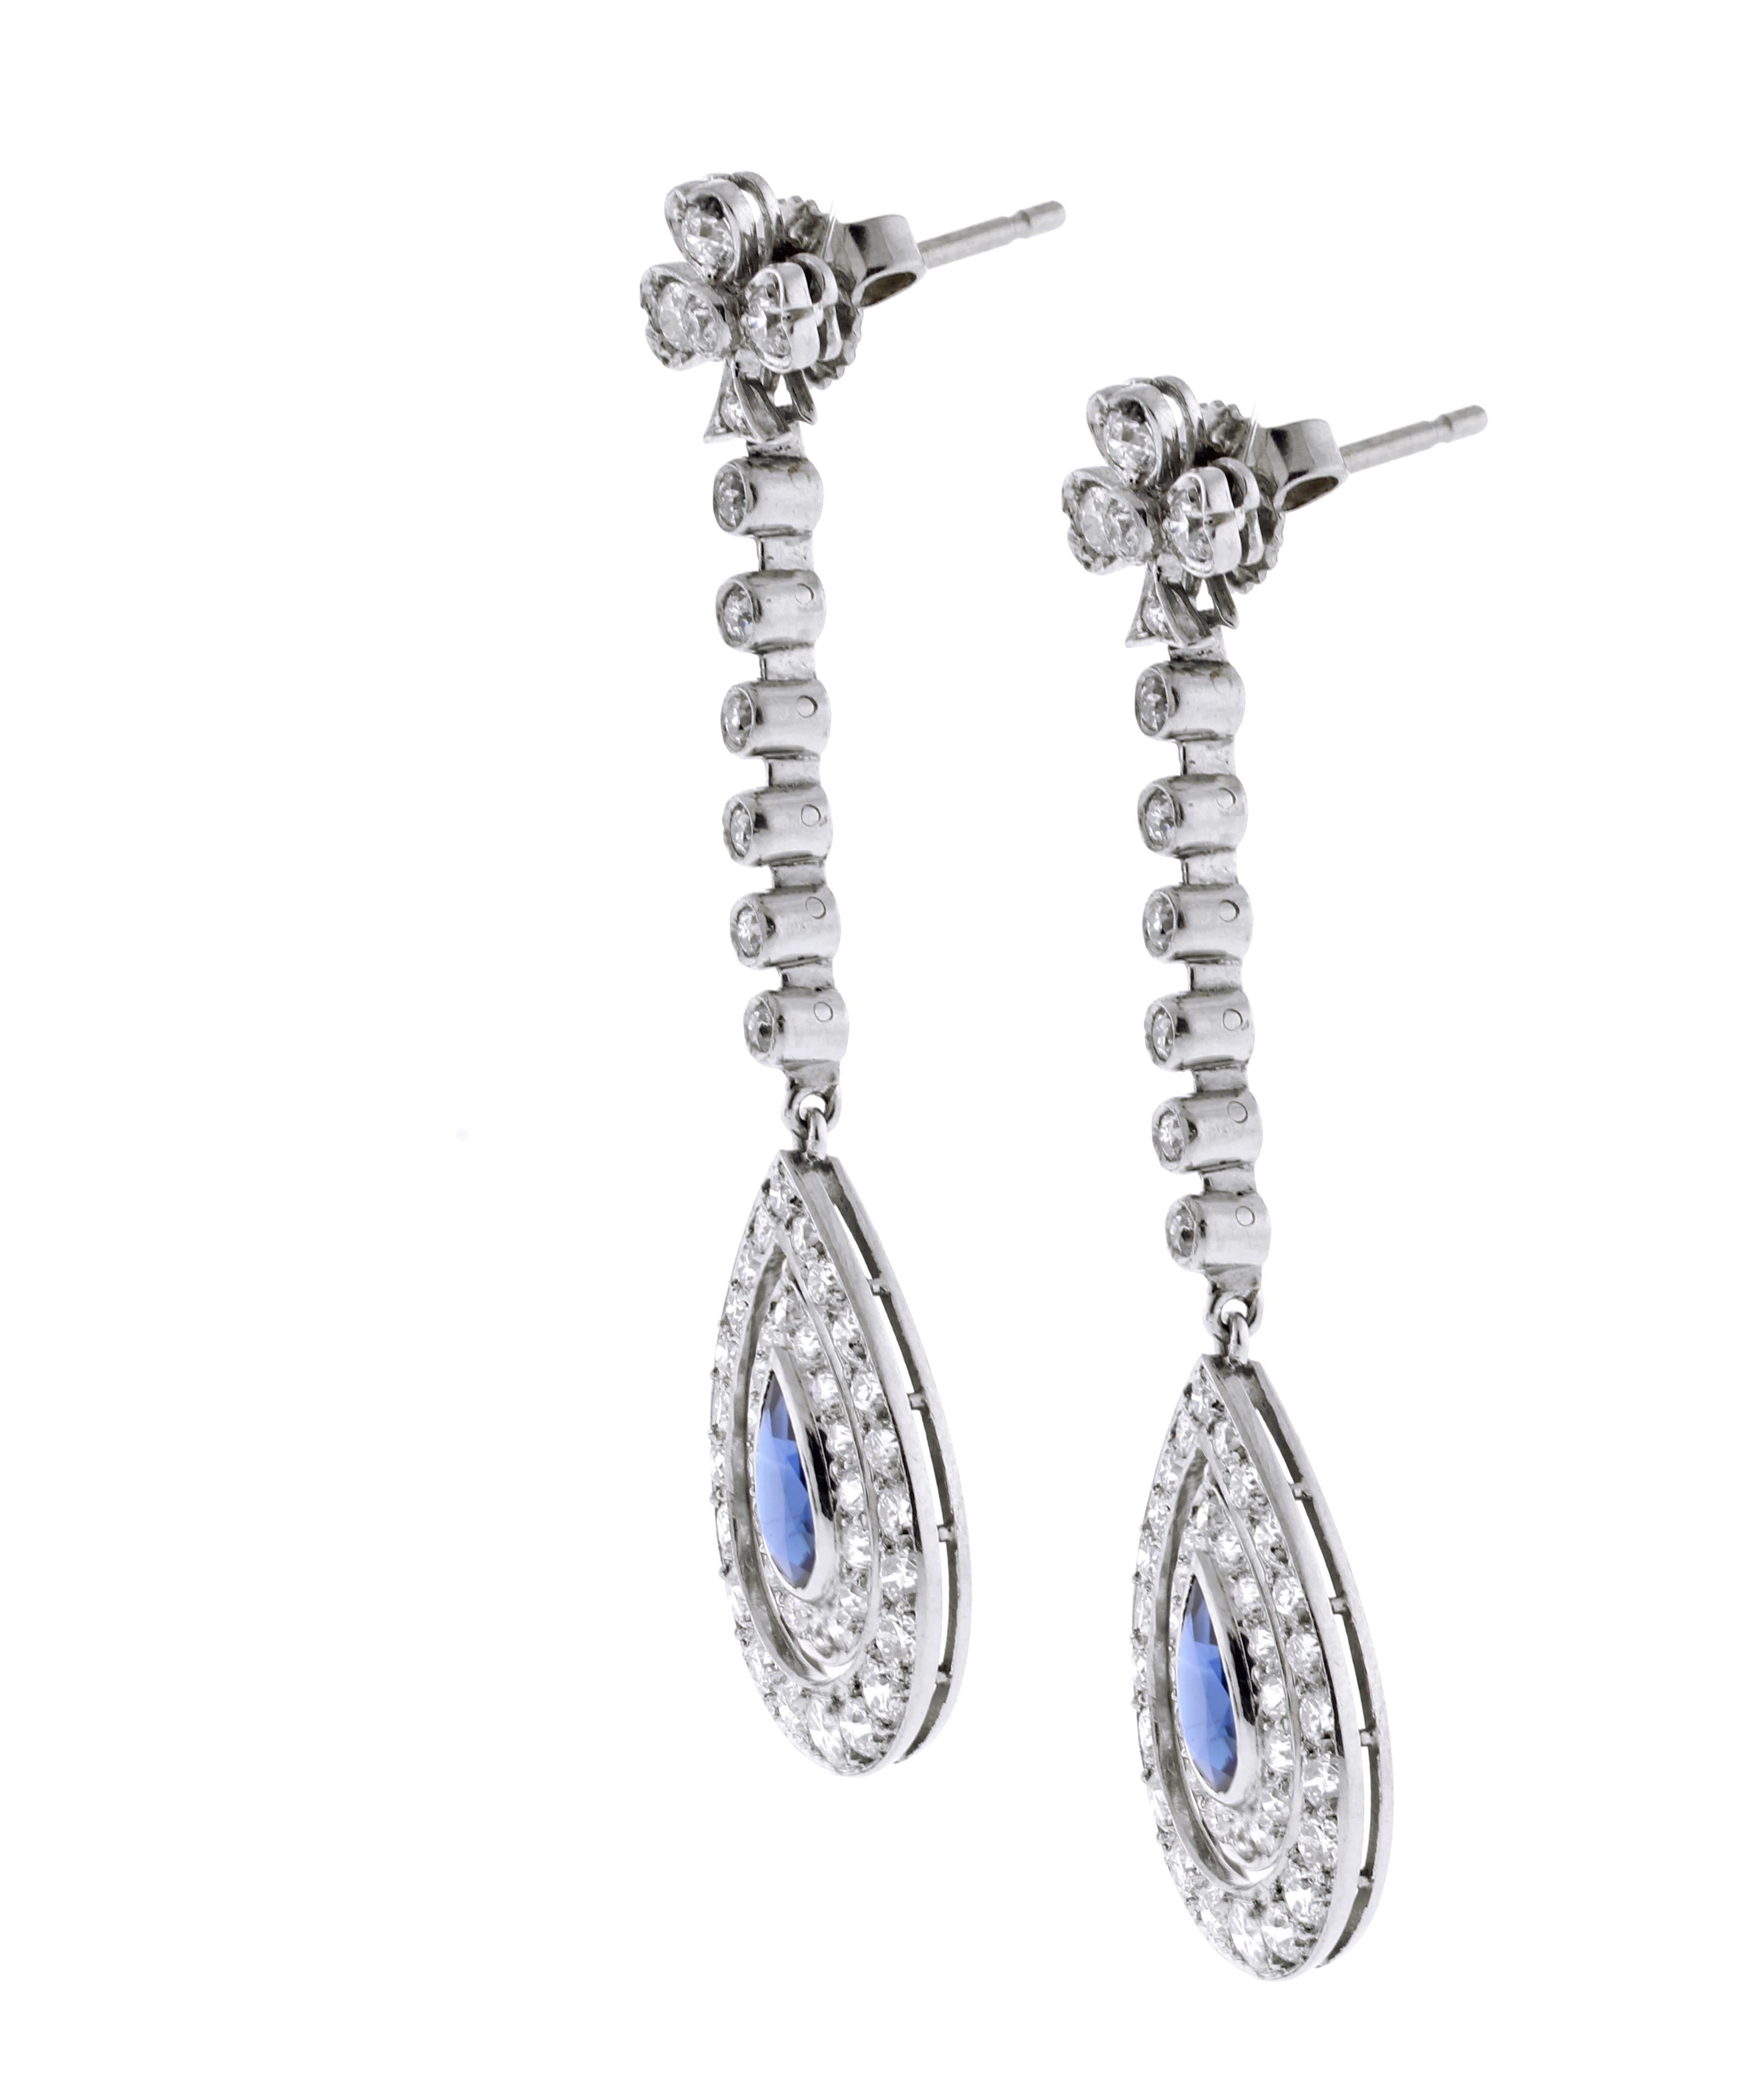 A pair of Art Deco pear shape sapphire and diamond drop earrings.

♦ Metal: Platinum
♦ 2 Sapphires=1.20 carats
♦ 98 old European cut diamonds=2 carats
♦ Circa 1935
♦ 1 7/8ths of an inch long
♦ Packaging: Pampillonia presentation box 
♦ Condition: